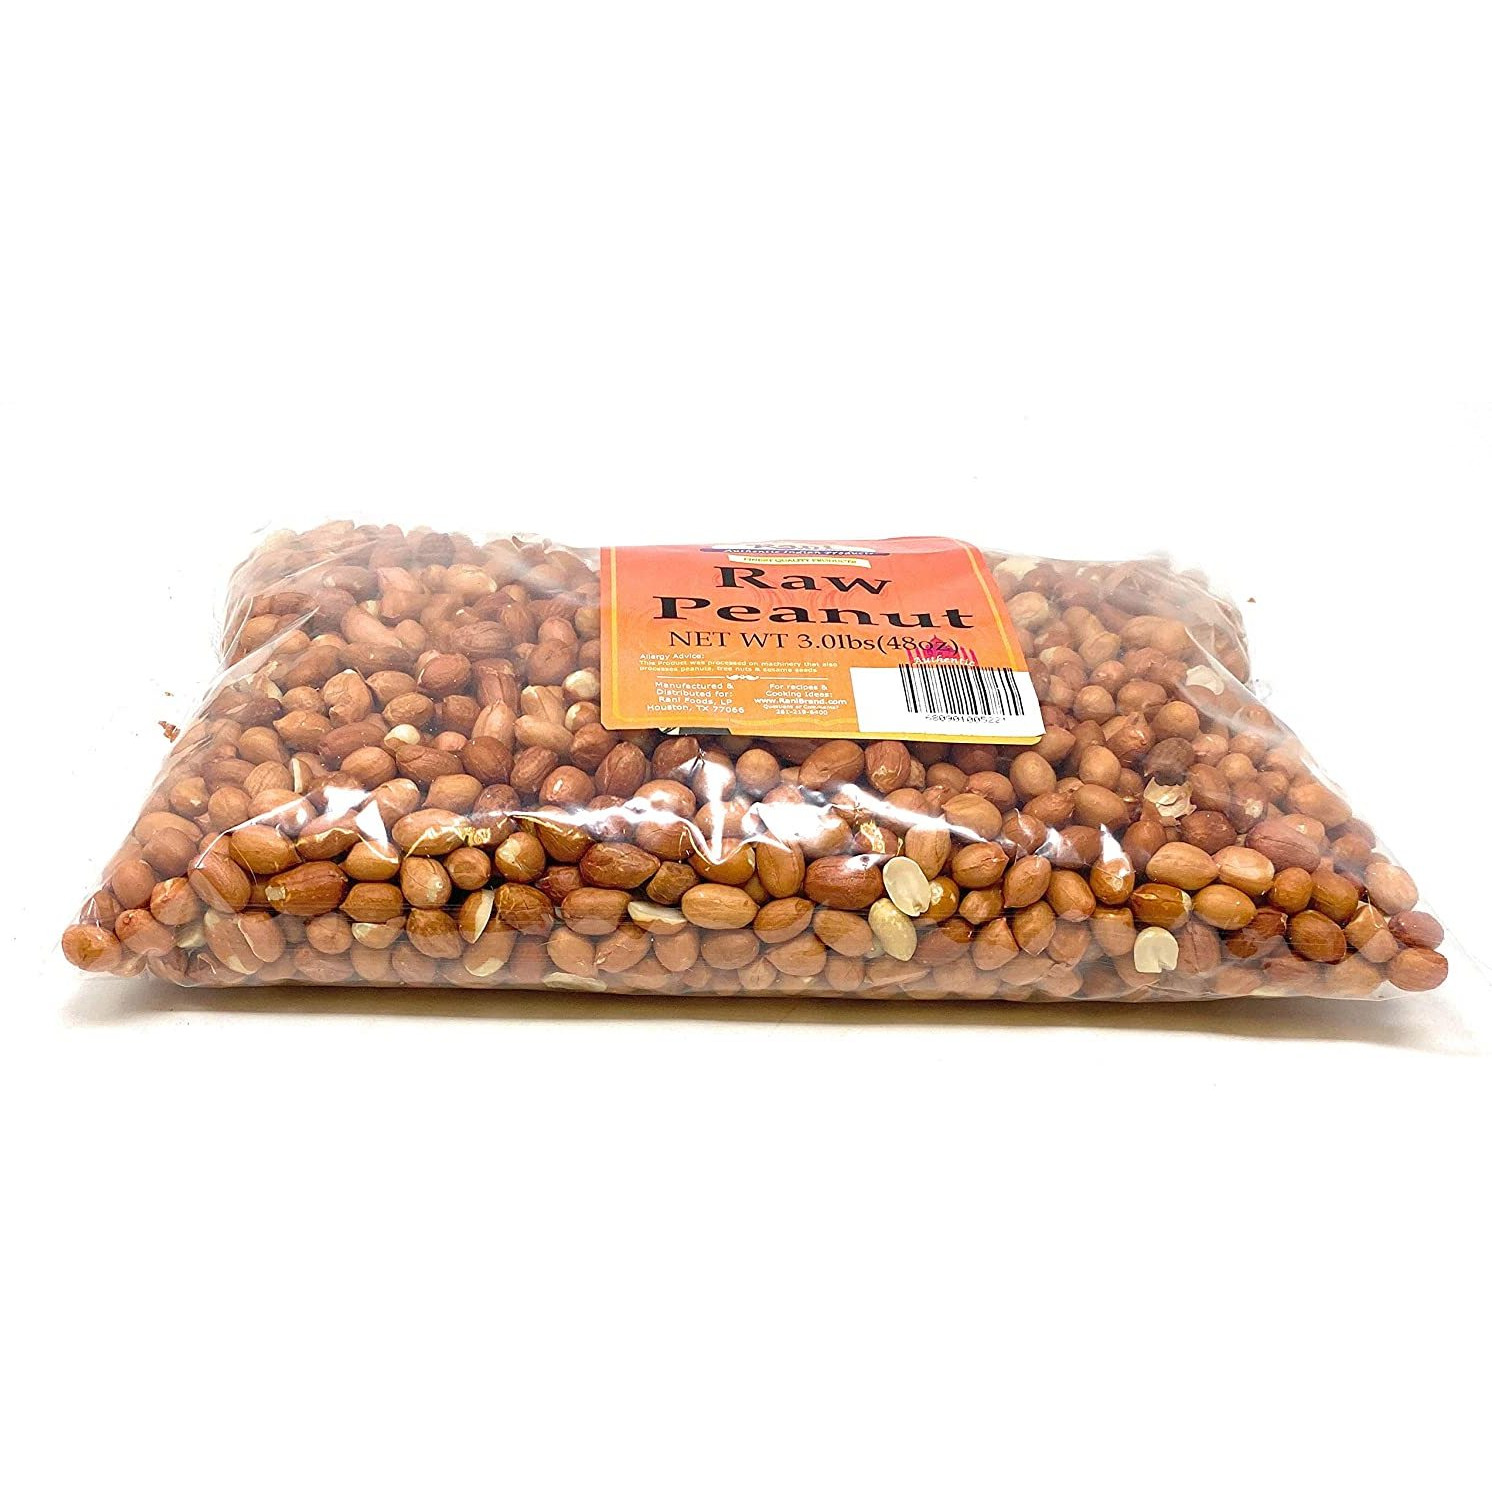 Rani Peanuts, Raw Whole With Skin (uncooked, unsalted) 48oz (3lb) Bulk ~ All Natural | Vegan | Gluten Free Ingredients | Fresh Product of USA ~ Spanish Grade Groundnut / Redskin